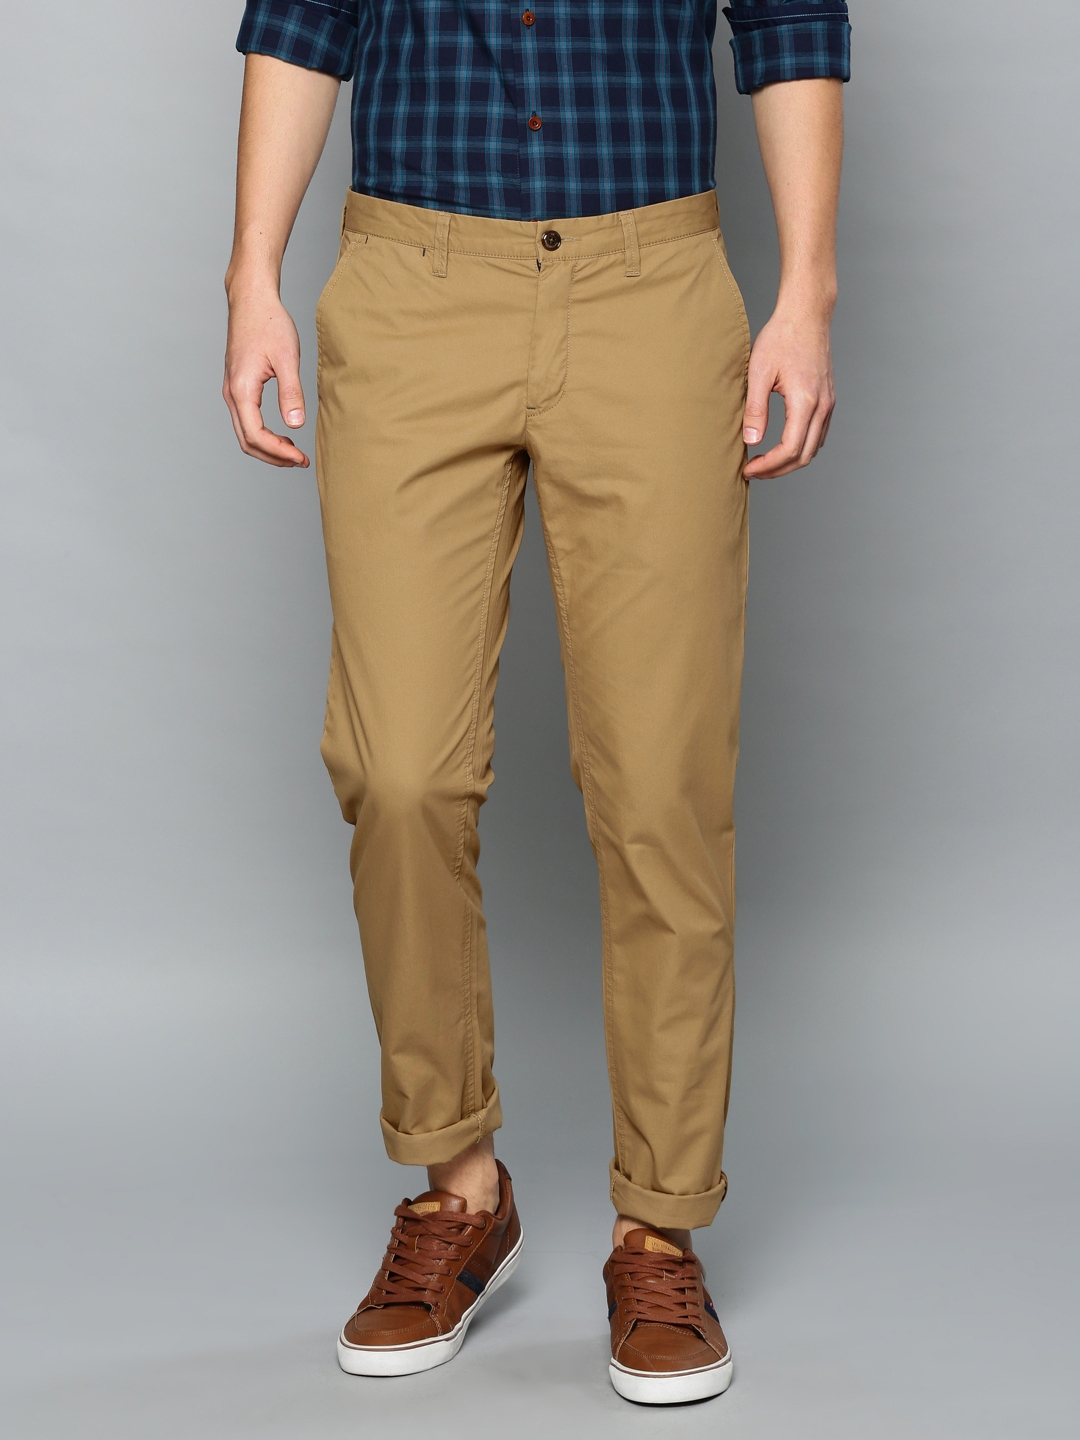 What Color Shirt Goes With Brown Pants? (Pics) • Ready Sleek